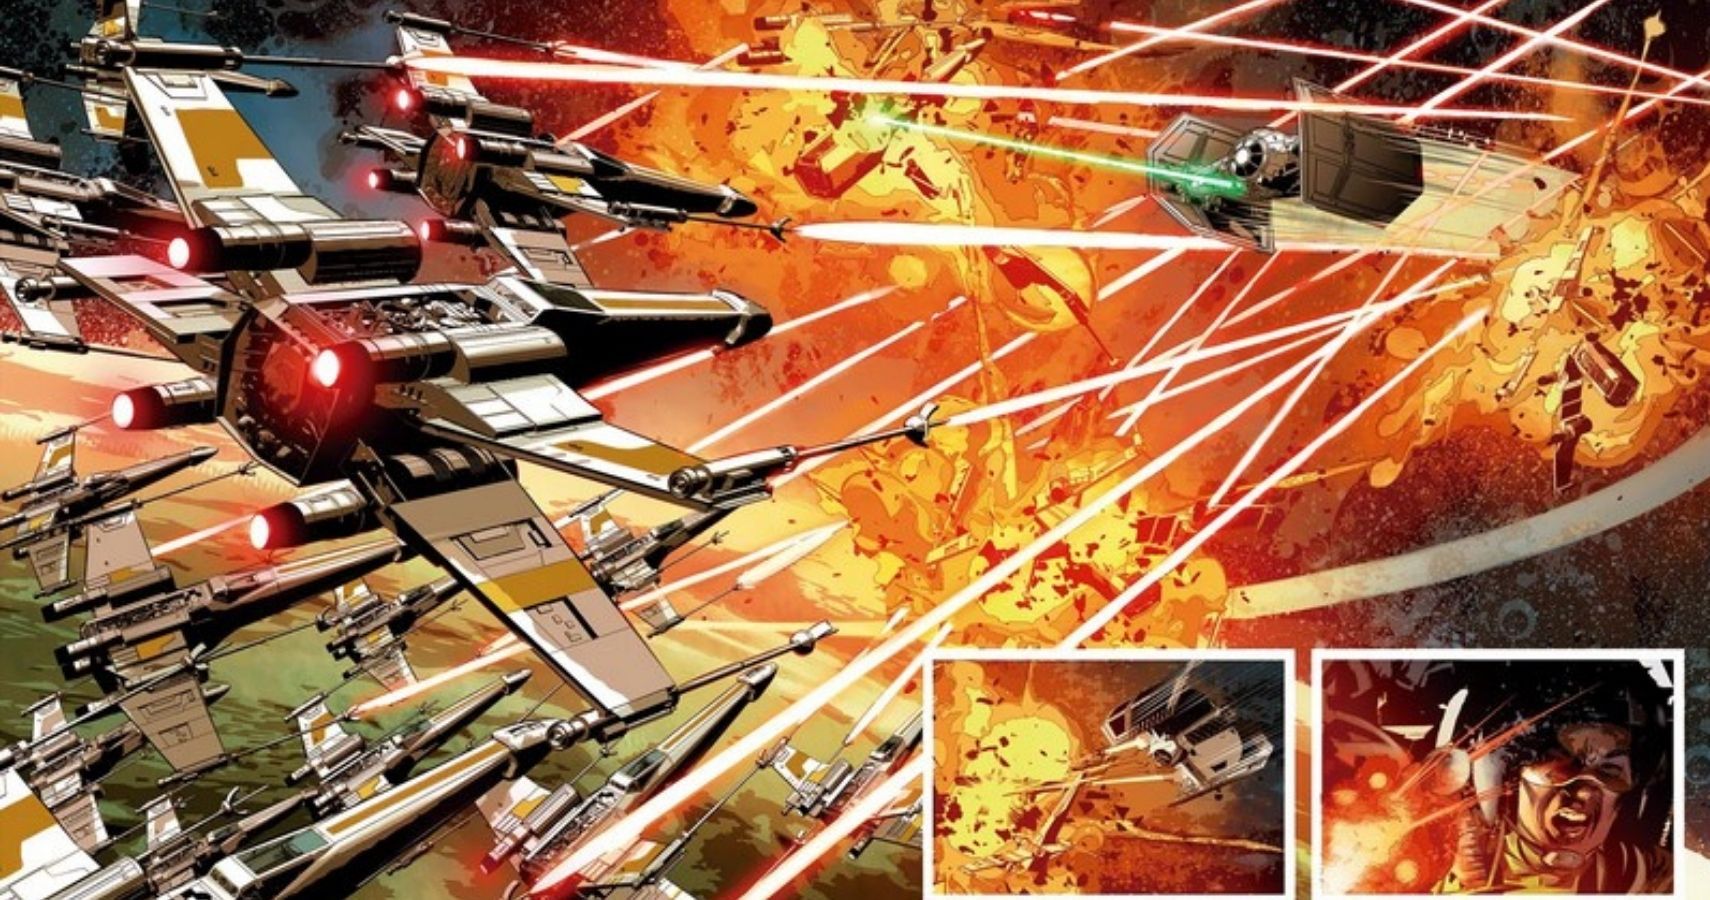 Star Wars: The 10 Best Space Battles, Ranked